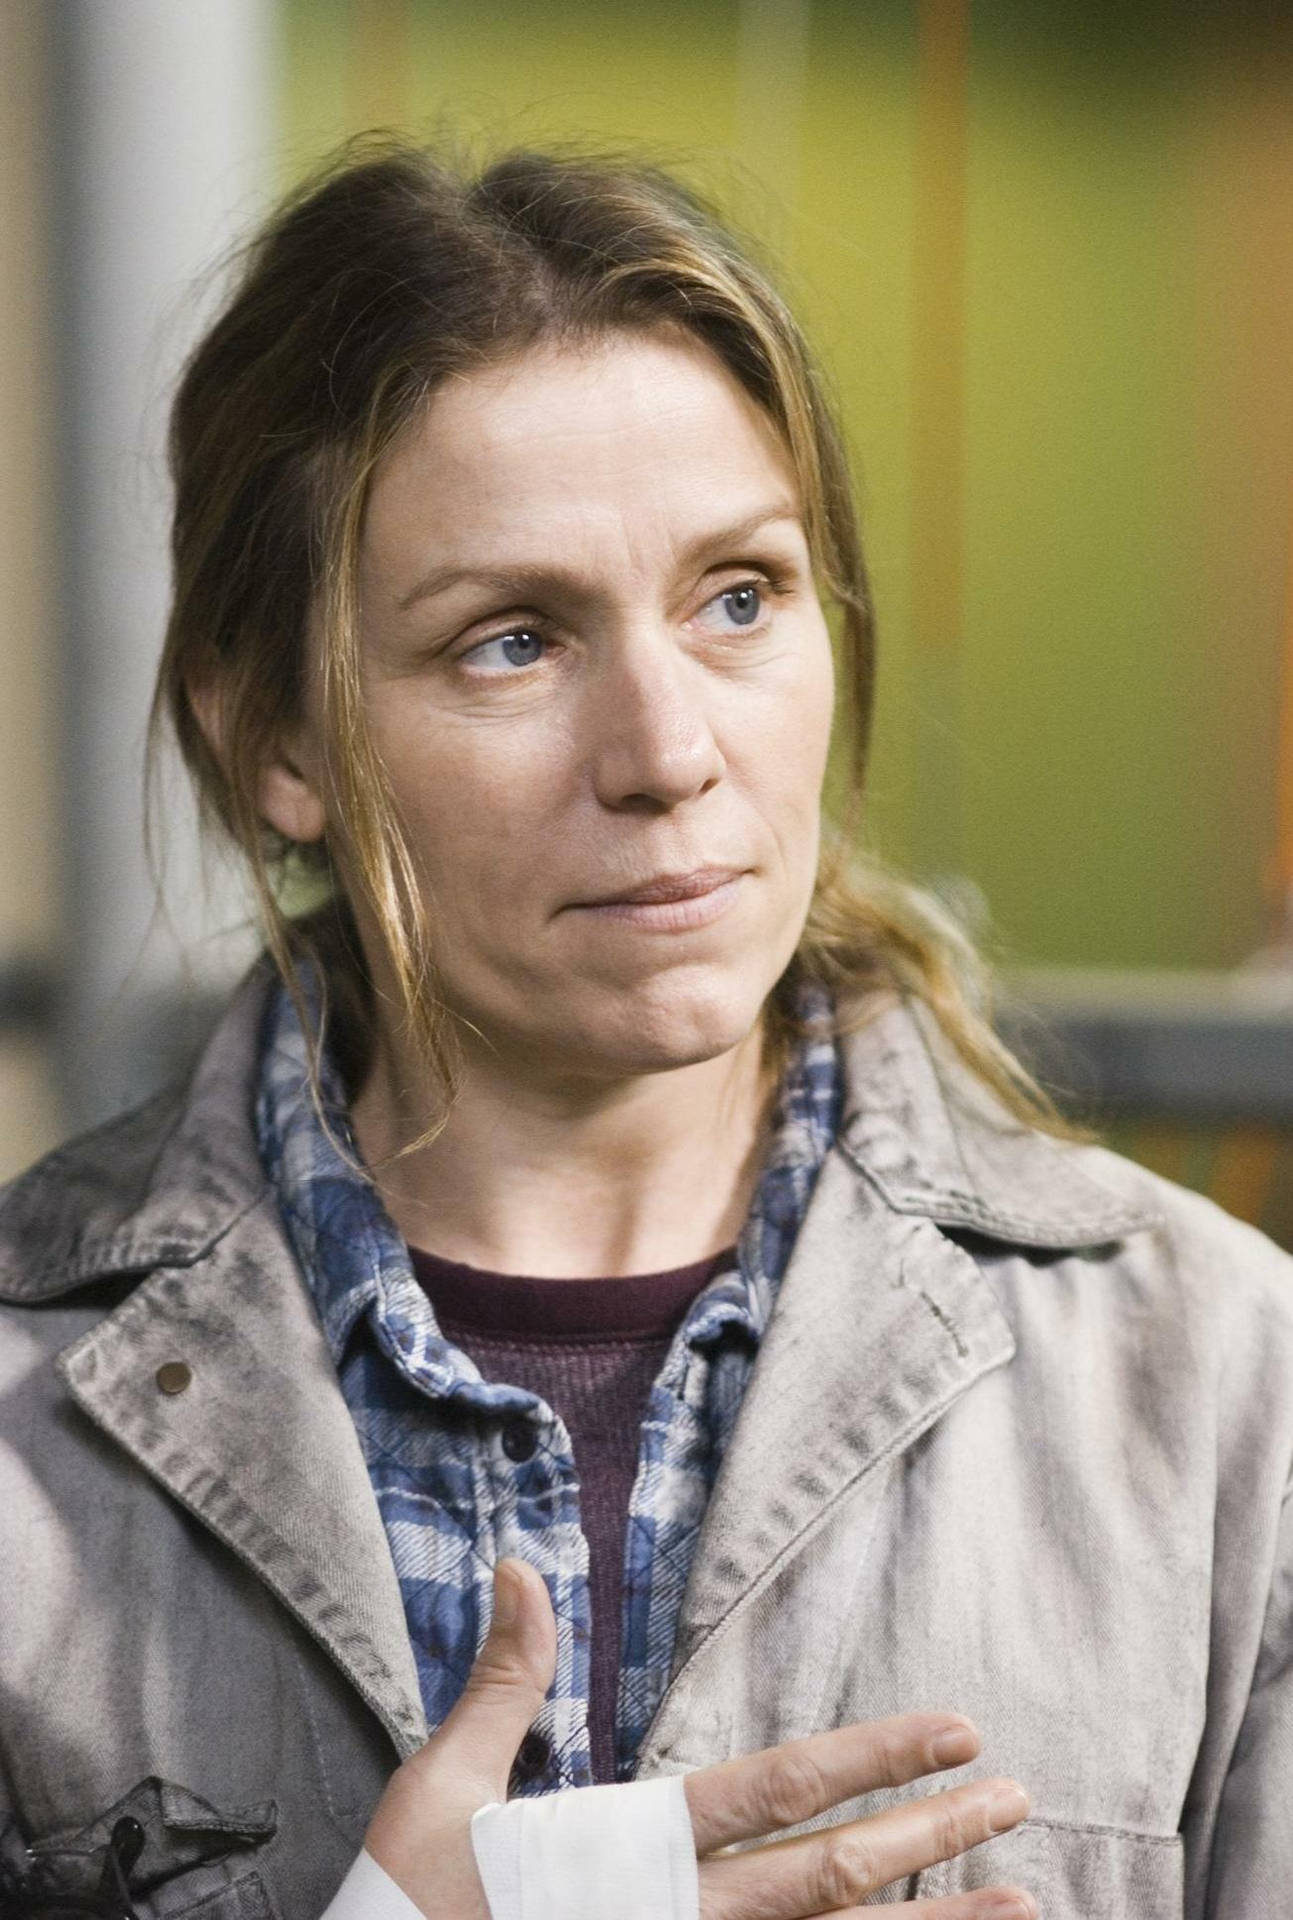 Frances McDormand in the 2005 film "North Country" Wallpaper